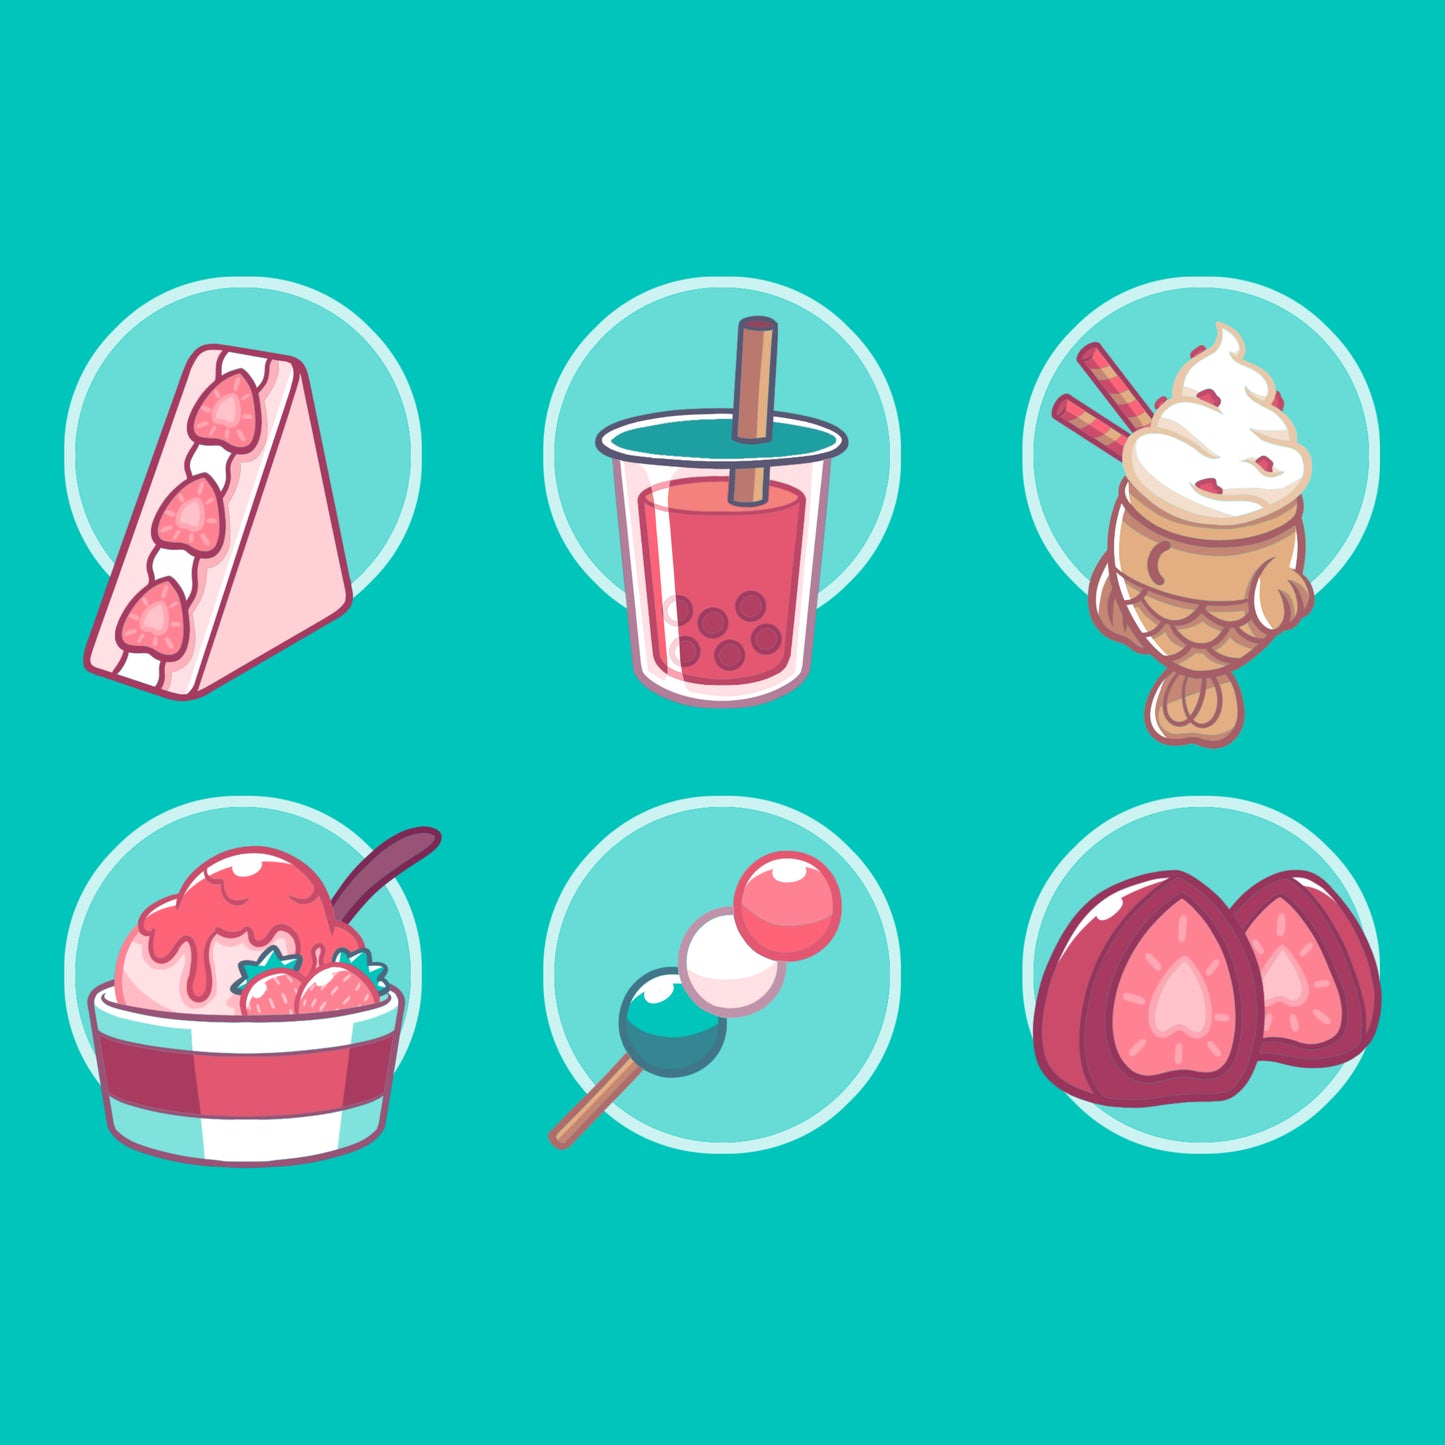 A collection of TeeTurtle Sweet Treats icons on a Caribbean Blue background.